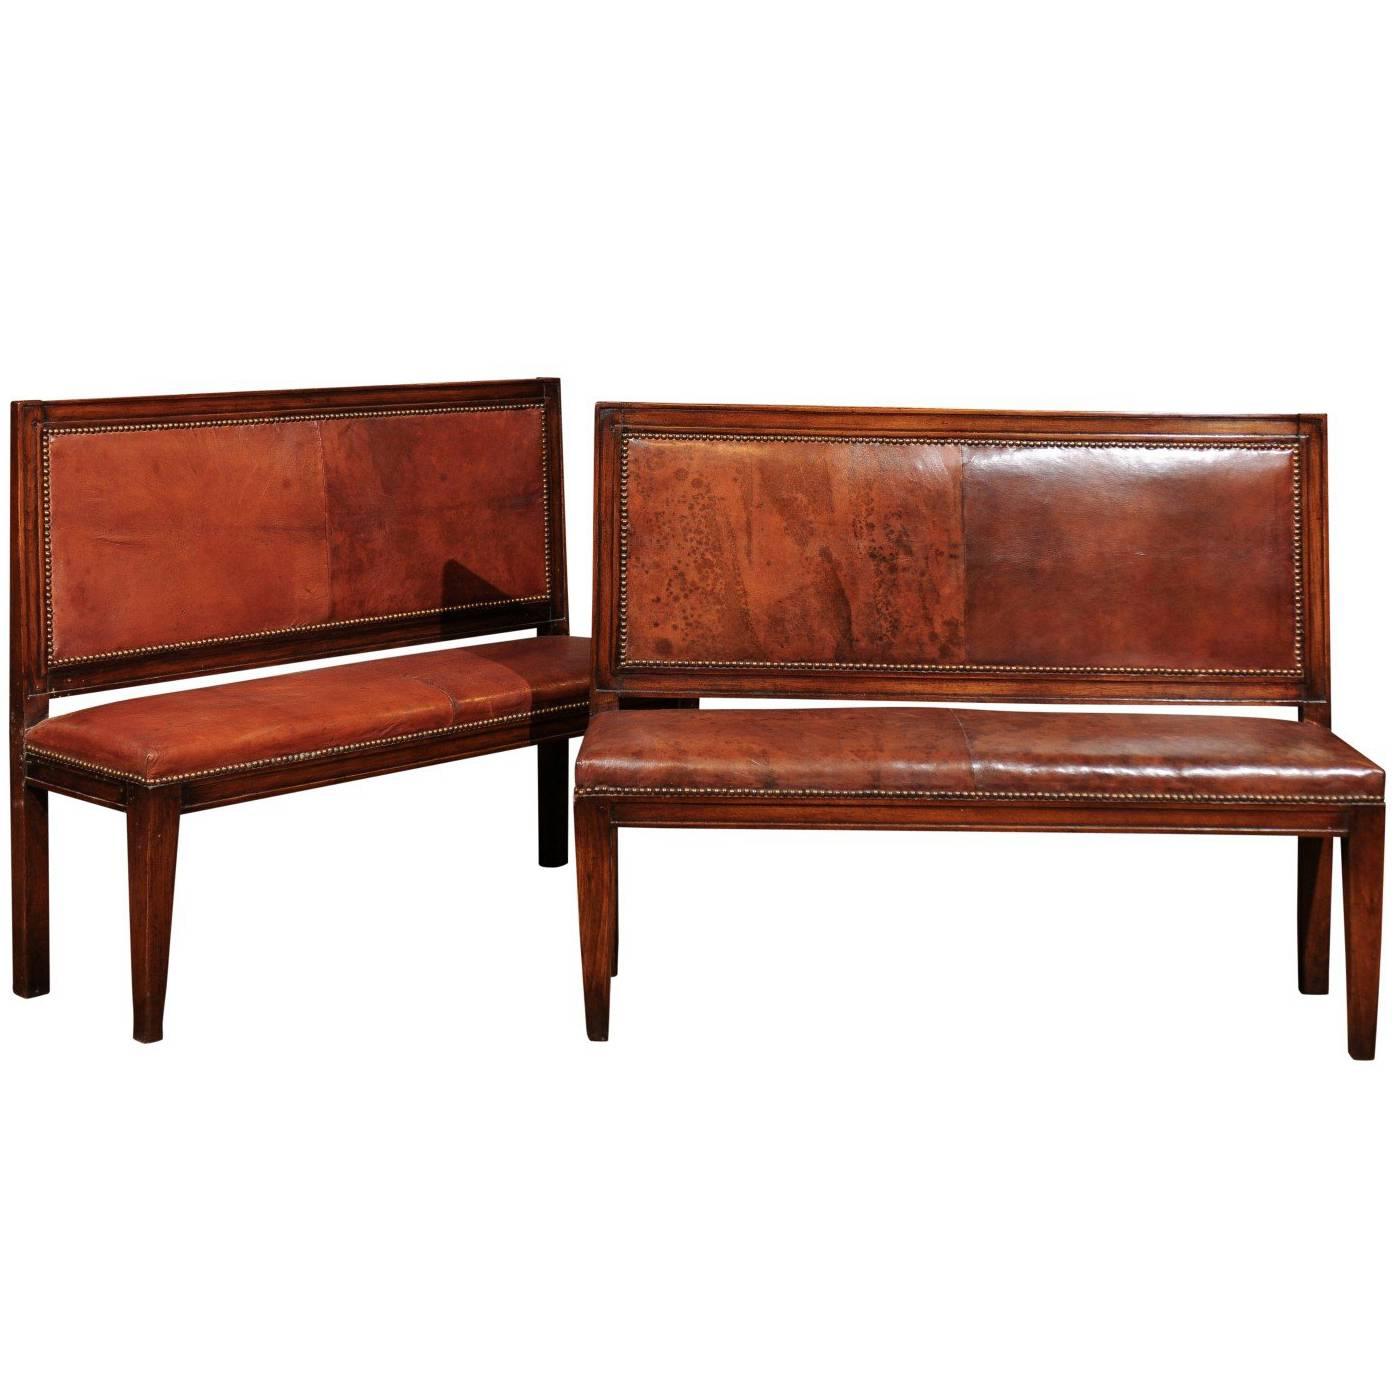 English 19th Century Mahogany and Leather Bench with Nail Head Trim - 1 avail.